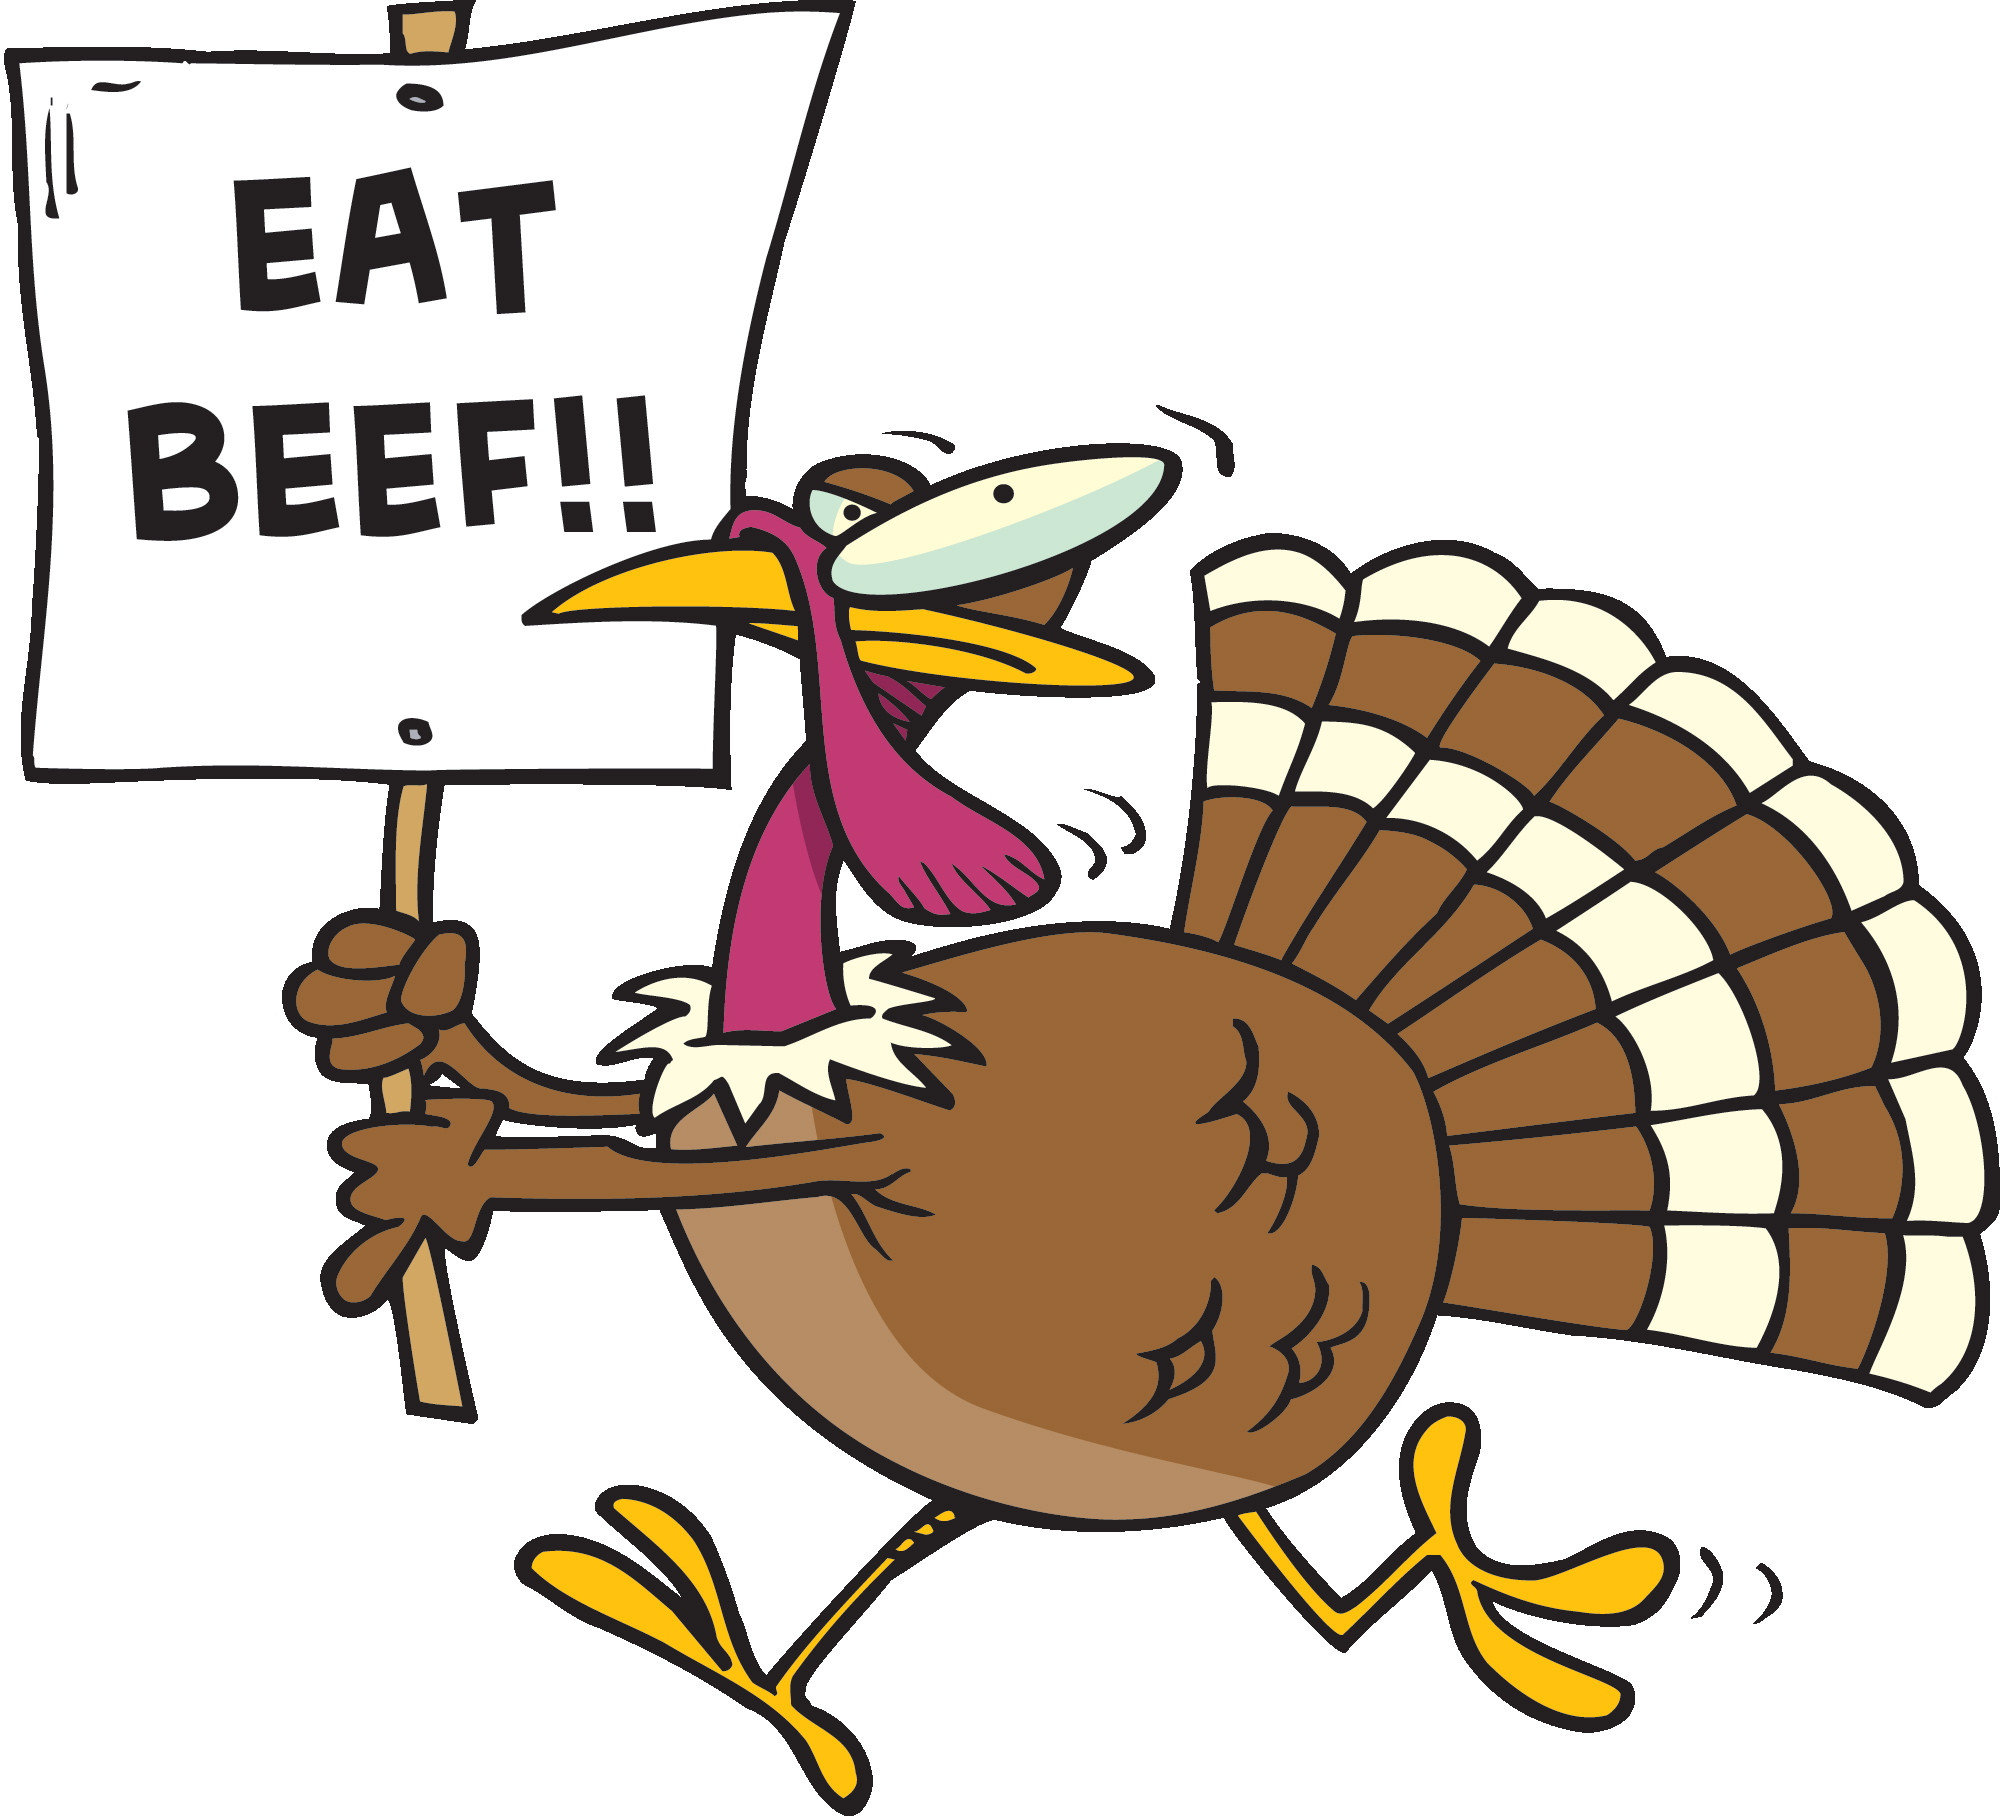 Thanksgiving Turkey Pictures Free
 Eat Beef Funny Turkey Clipart Image